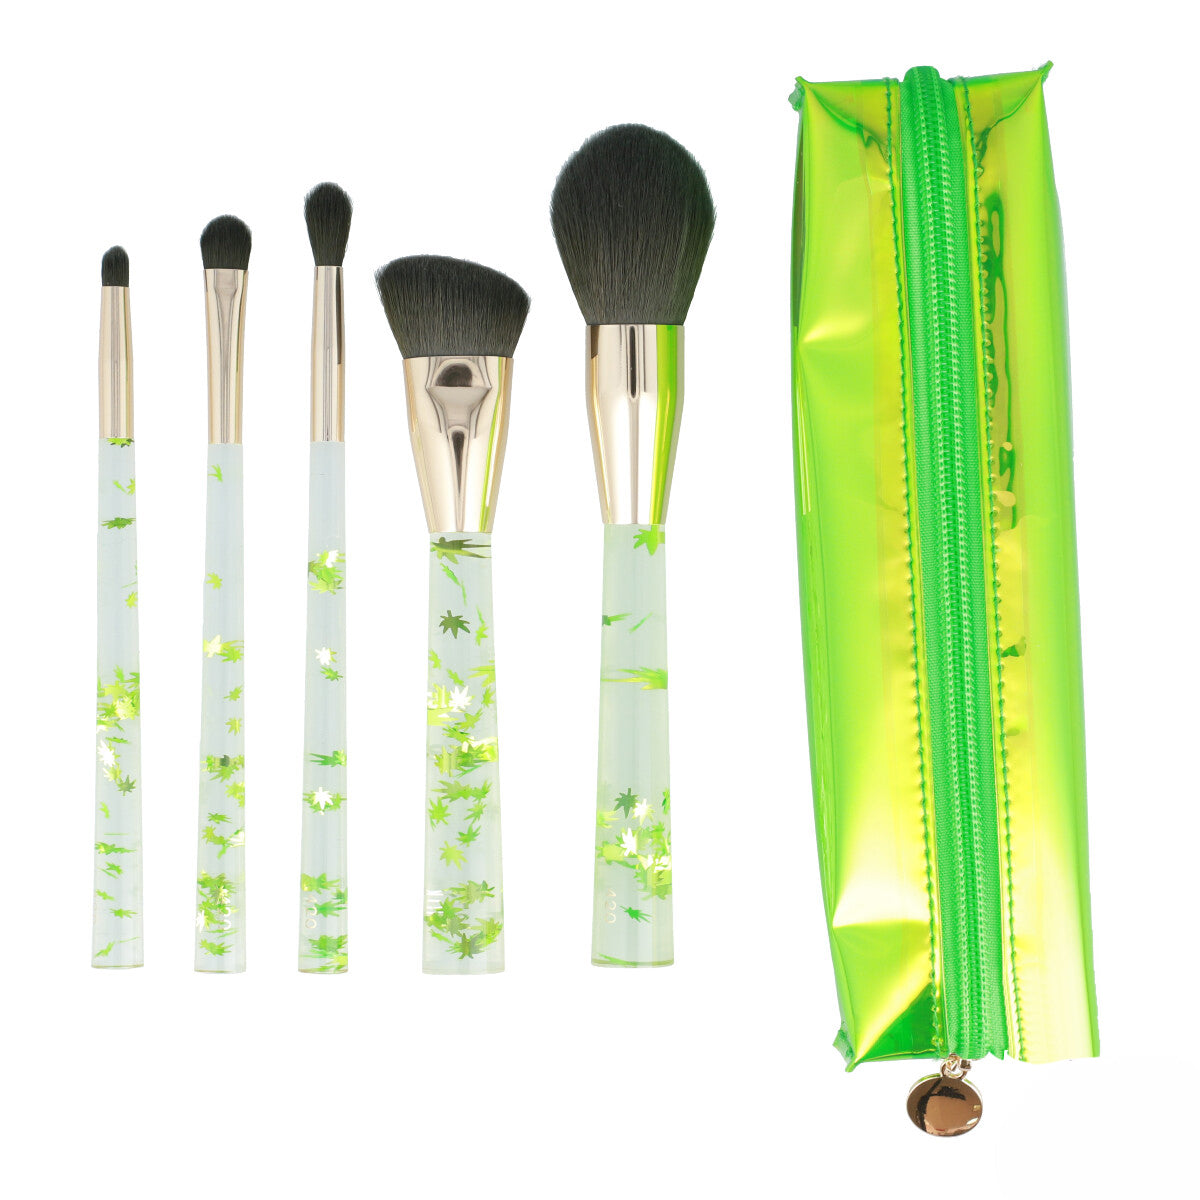 The 420 Brush Collection